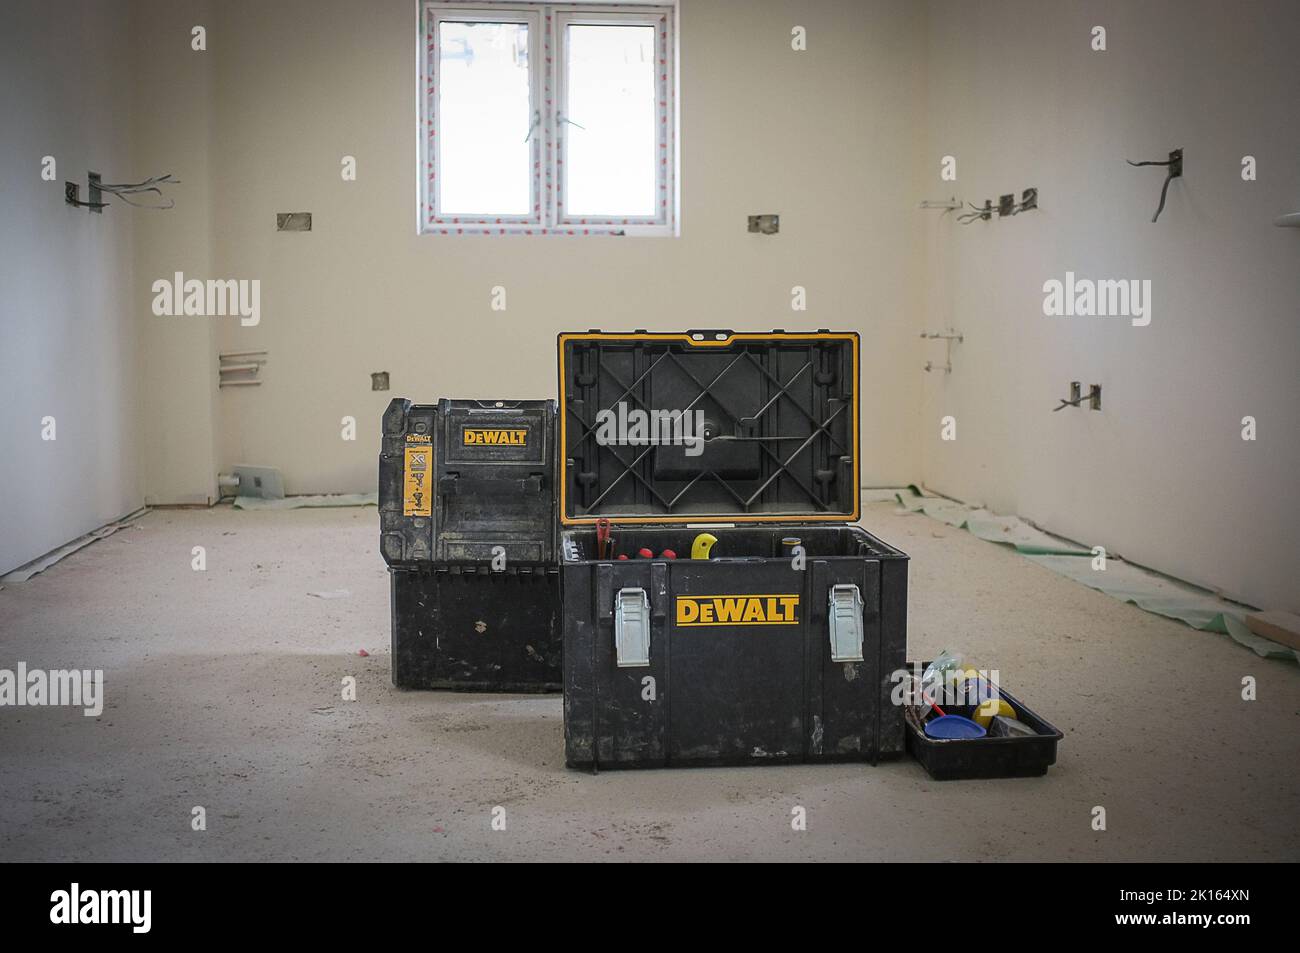 A NEW BUILD, BUILDING SITE WITH DEWALT TOOL STORAGE BOXES IN MIDDLE OF THE ROOM BEING BUILT Stock Photo